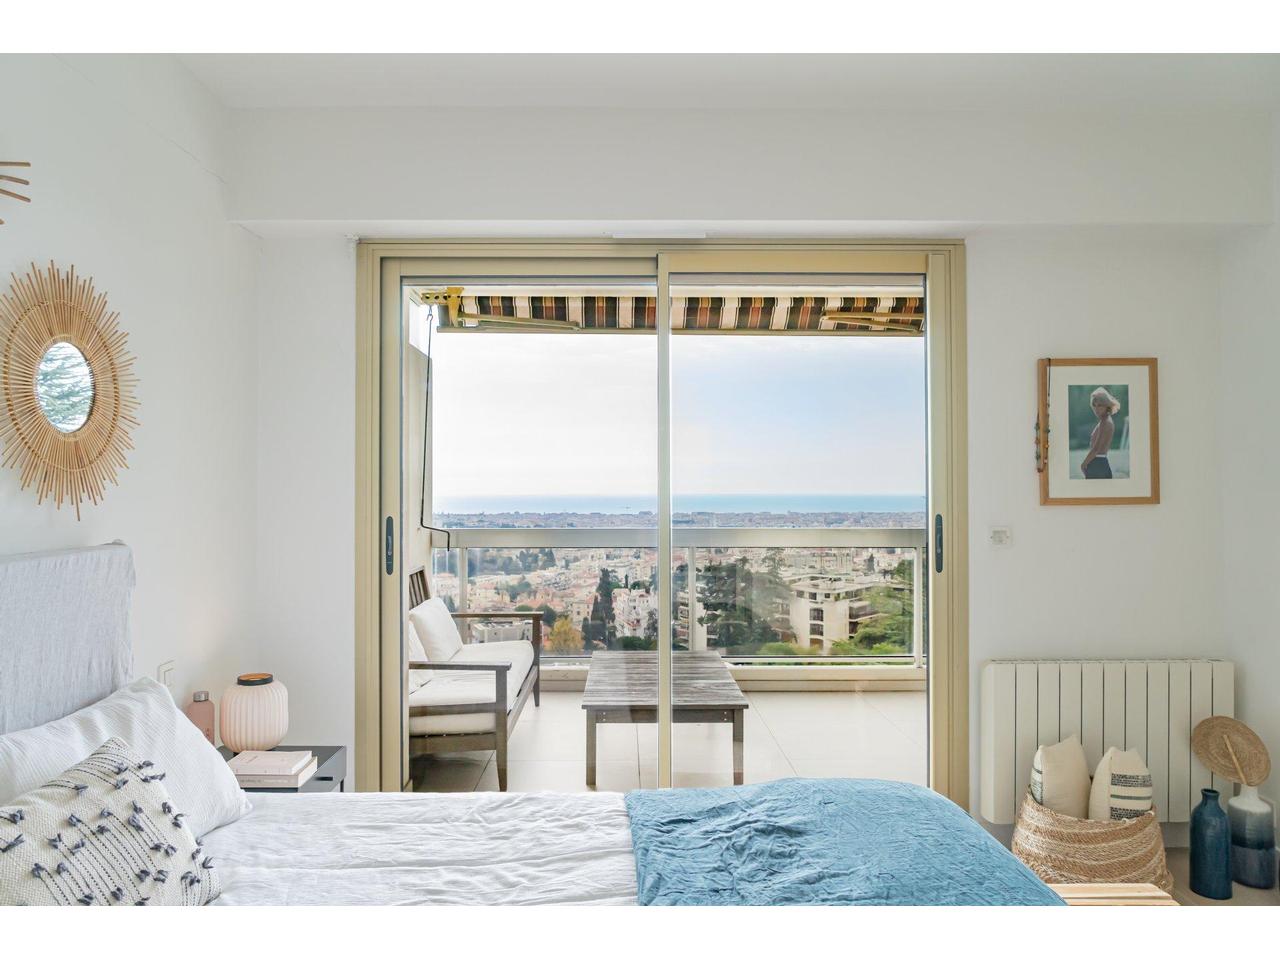 Nice Riviera - Agence Immobiliére Nice Côte d'Azur | Appartement  4 Rooms 114.47m2  for sale   895 000 €